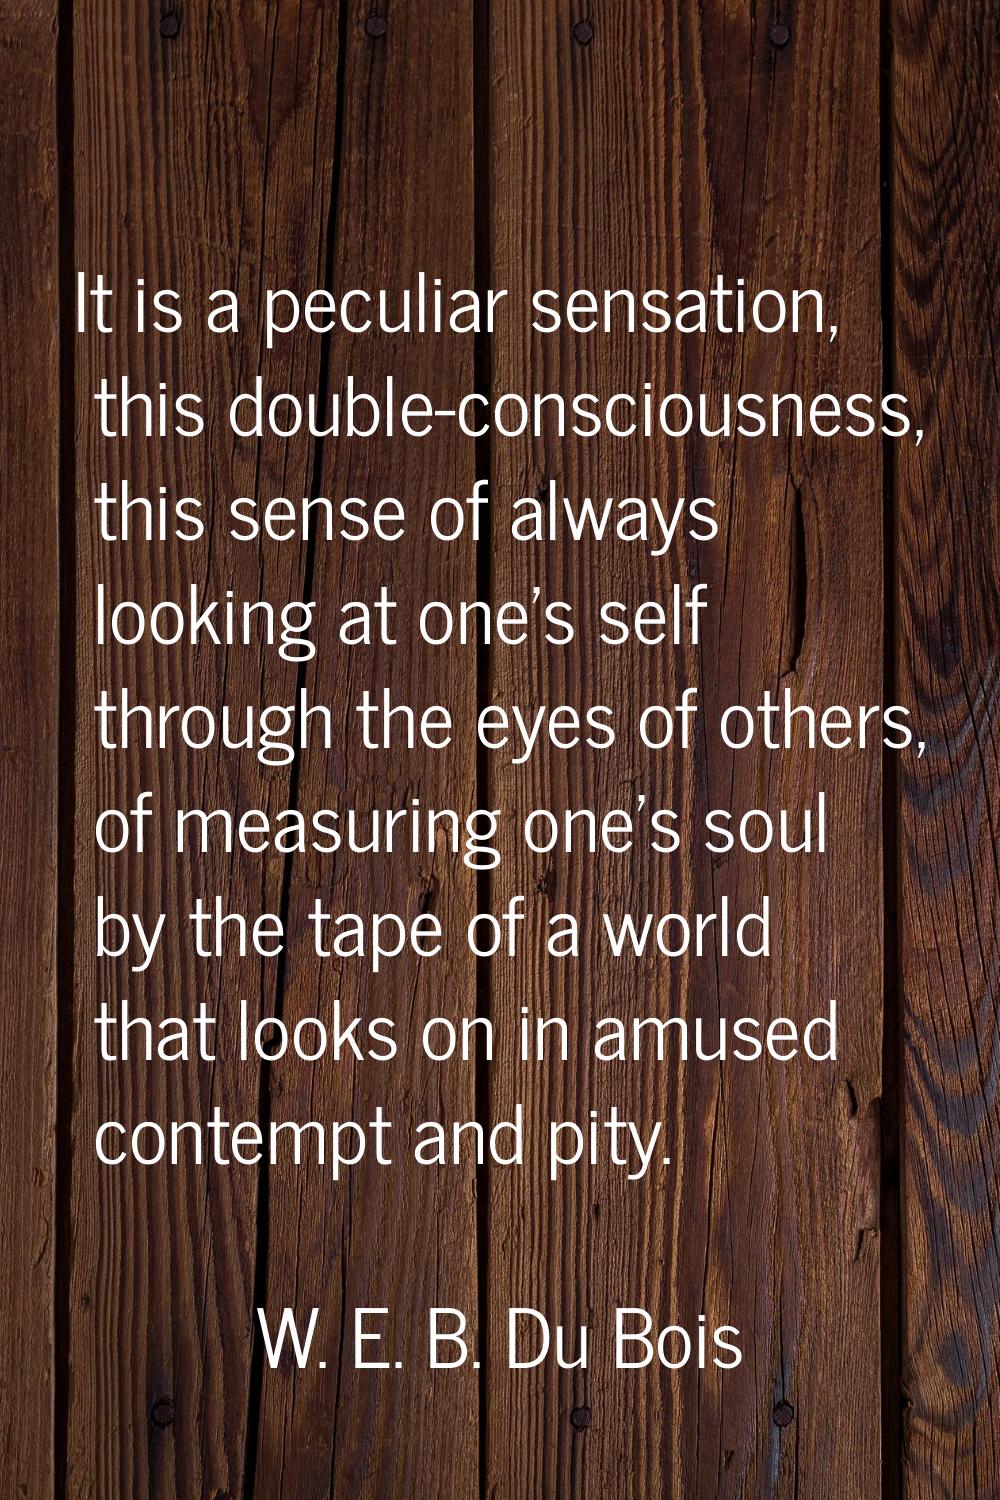 It is a peculiar sensation, this double-consciousness, this sense of always looking at one's self t